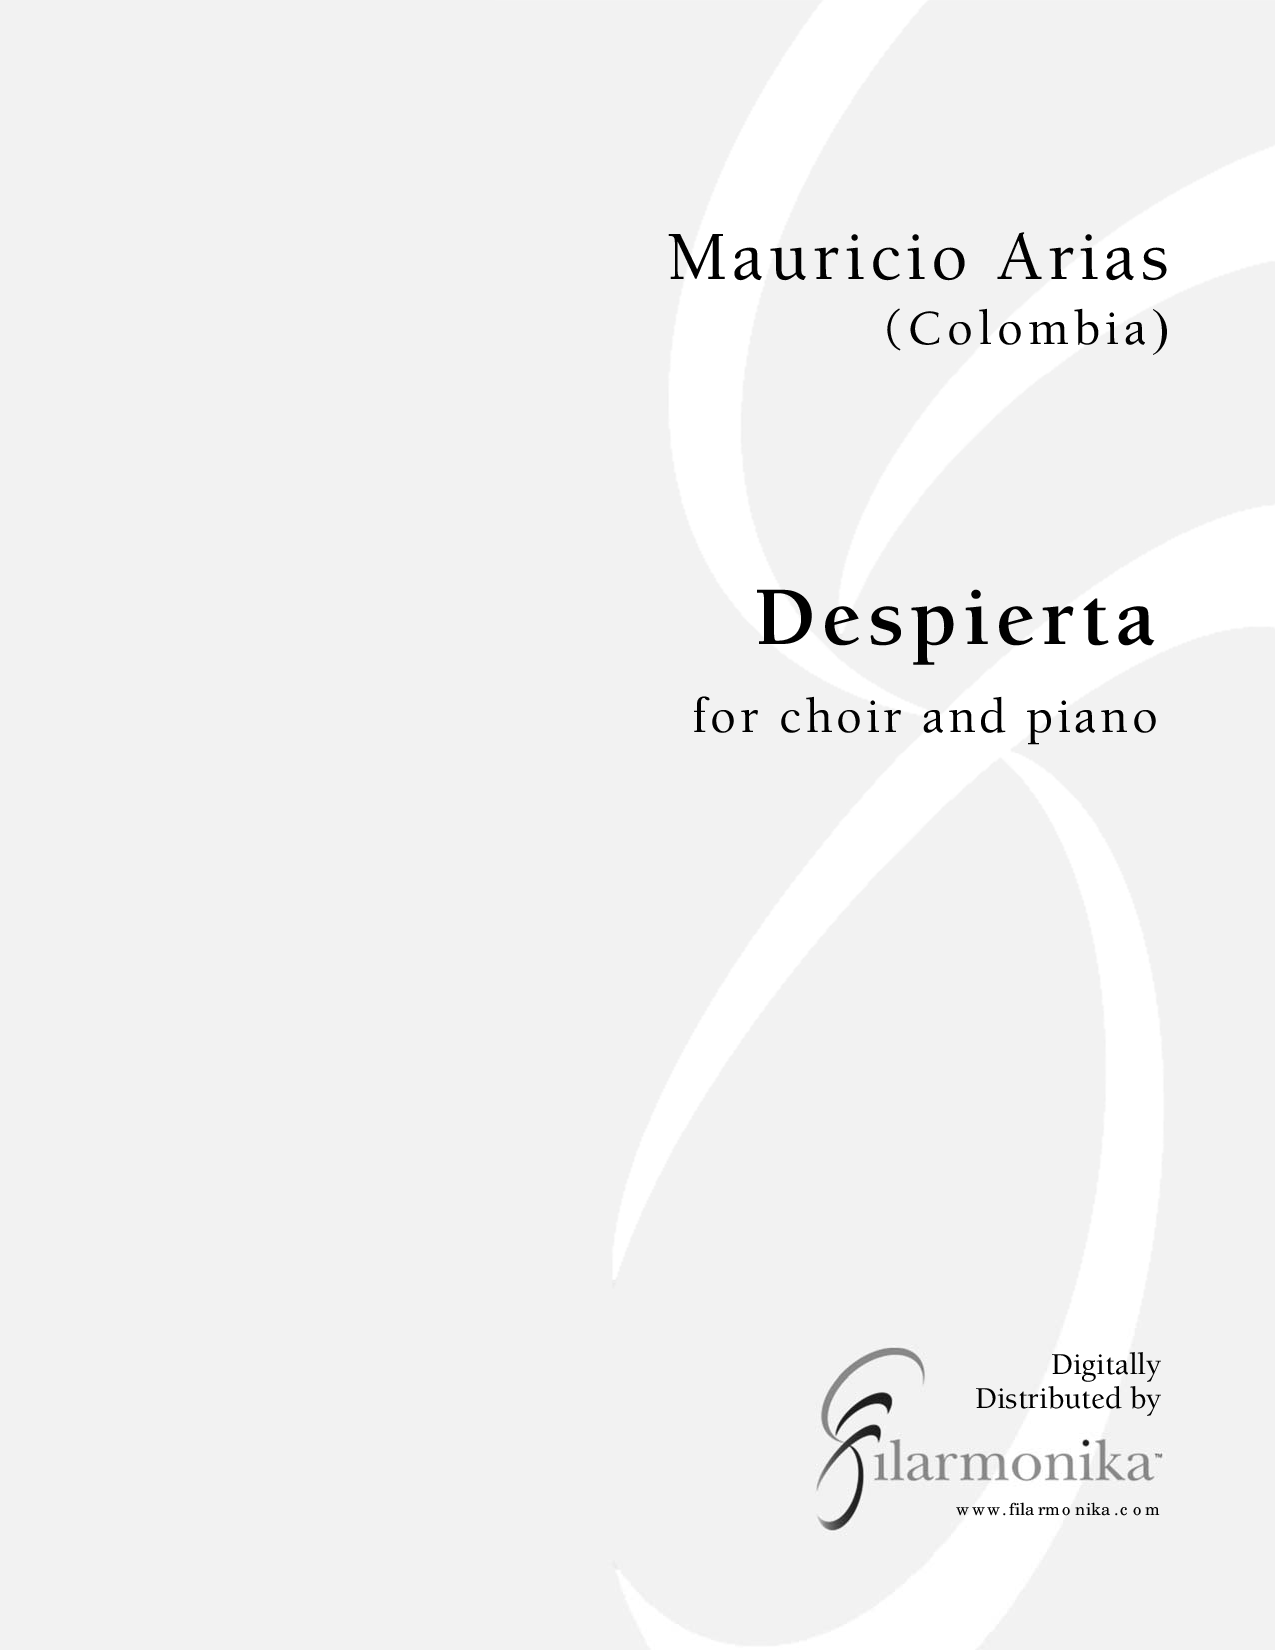 Despierta, for choir and piano